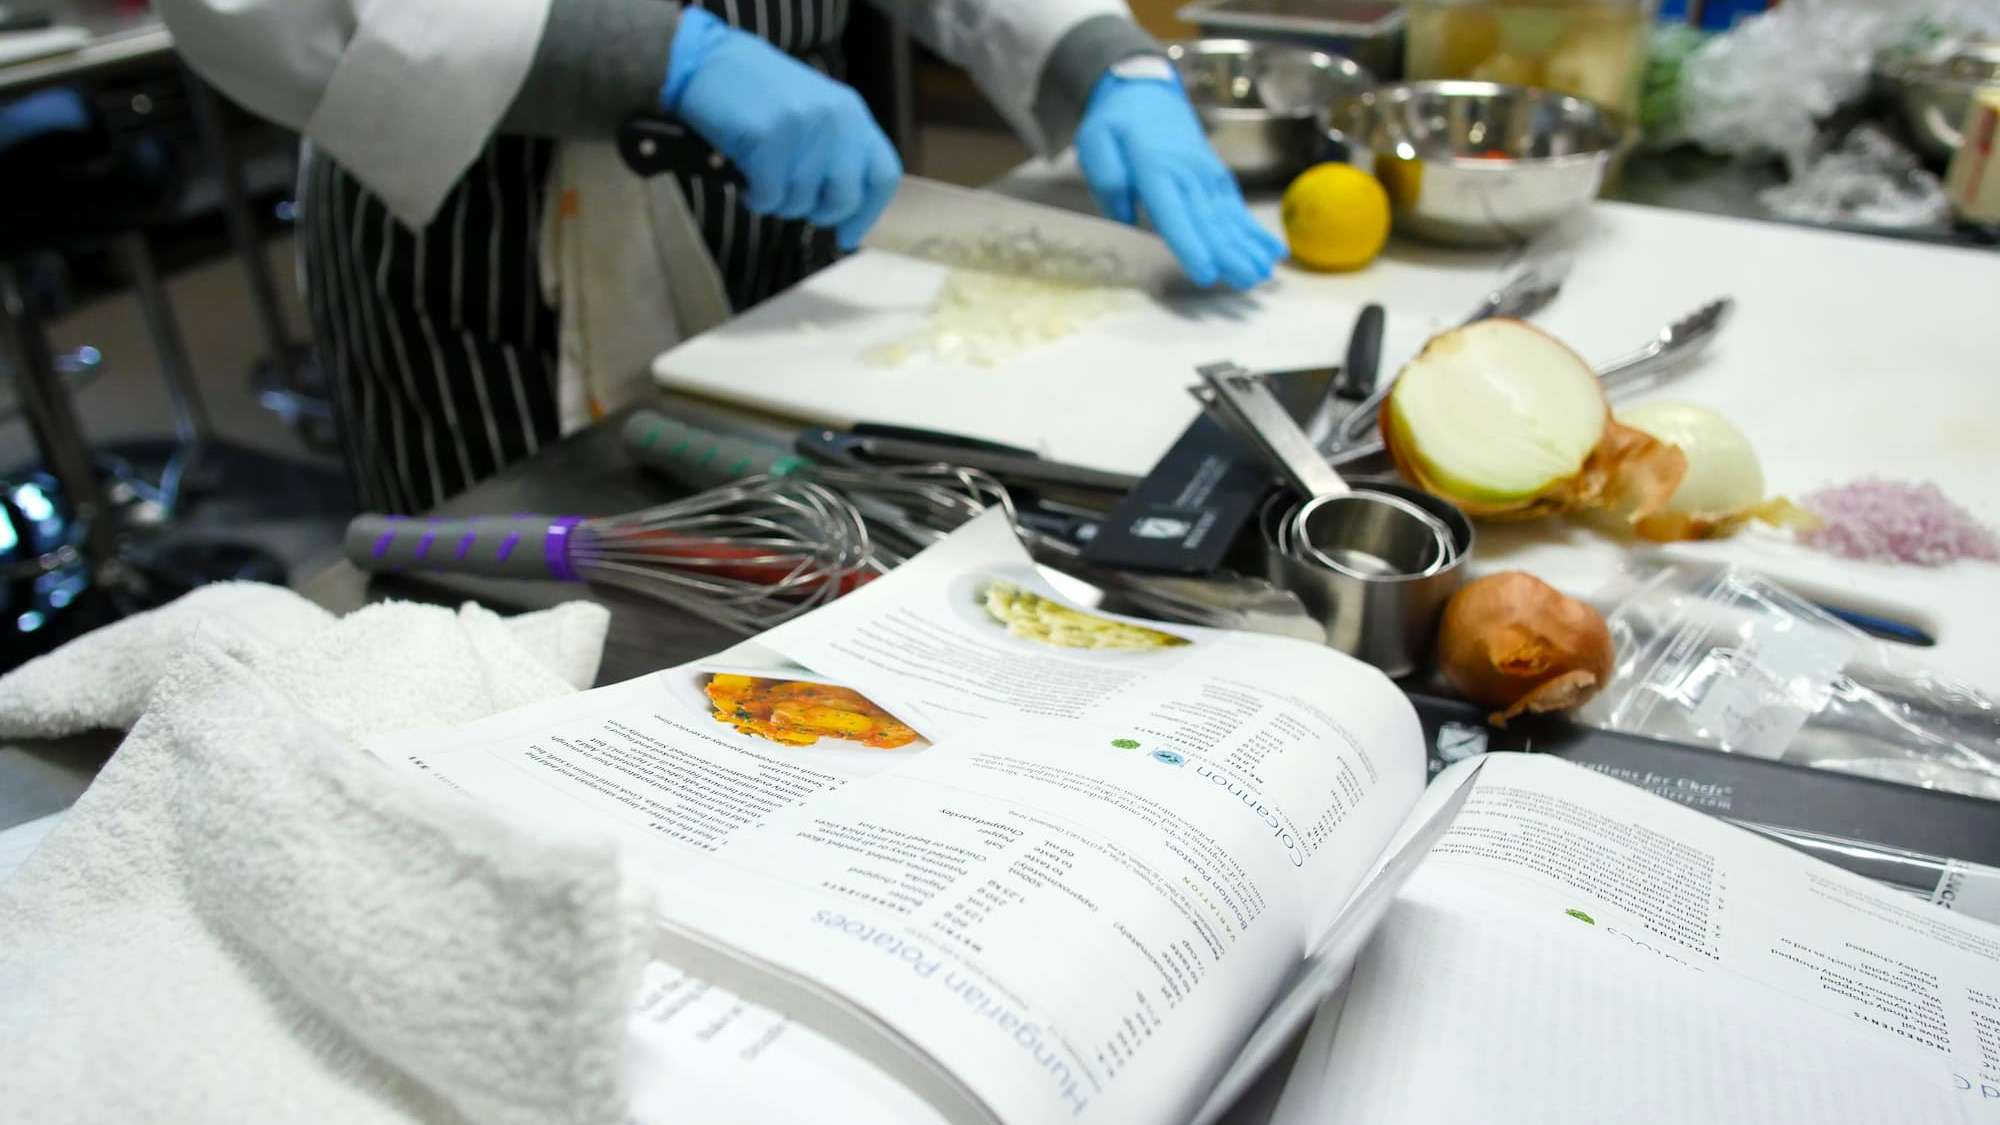 Close-up view of a busy kitchen work space. A student dices an onion as other tools and ingredients are kept nearby.